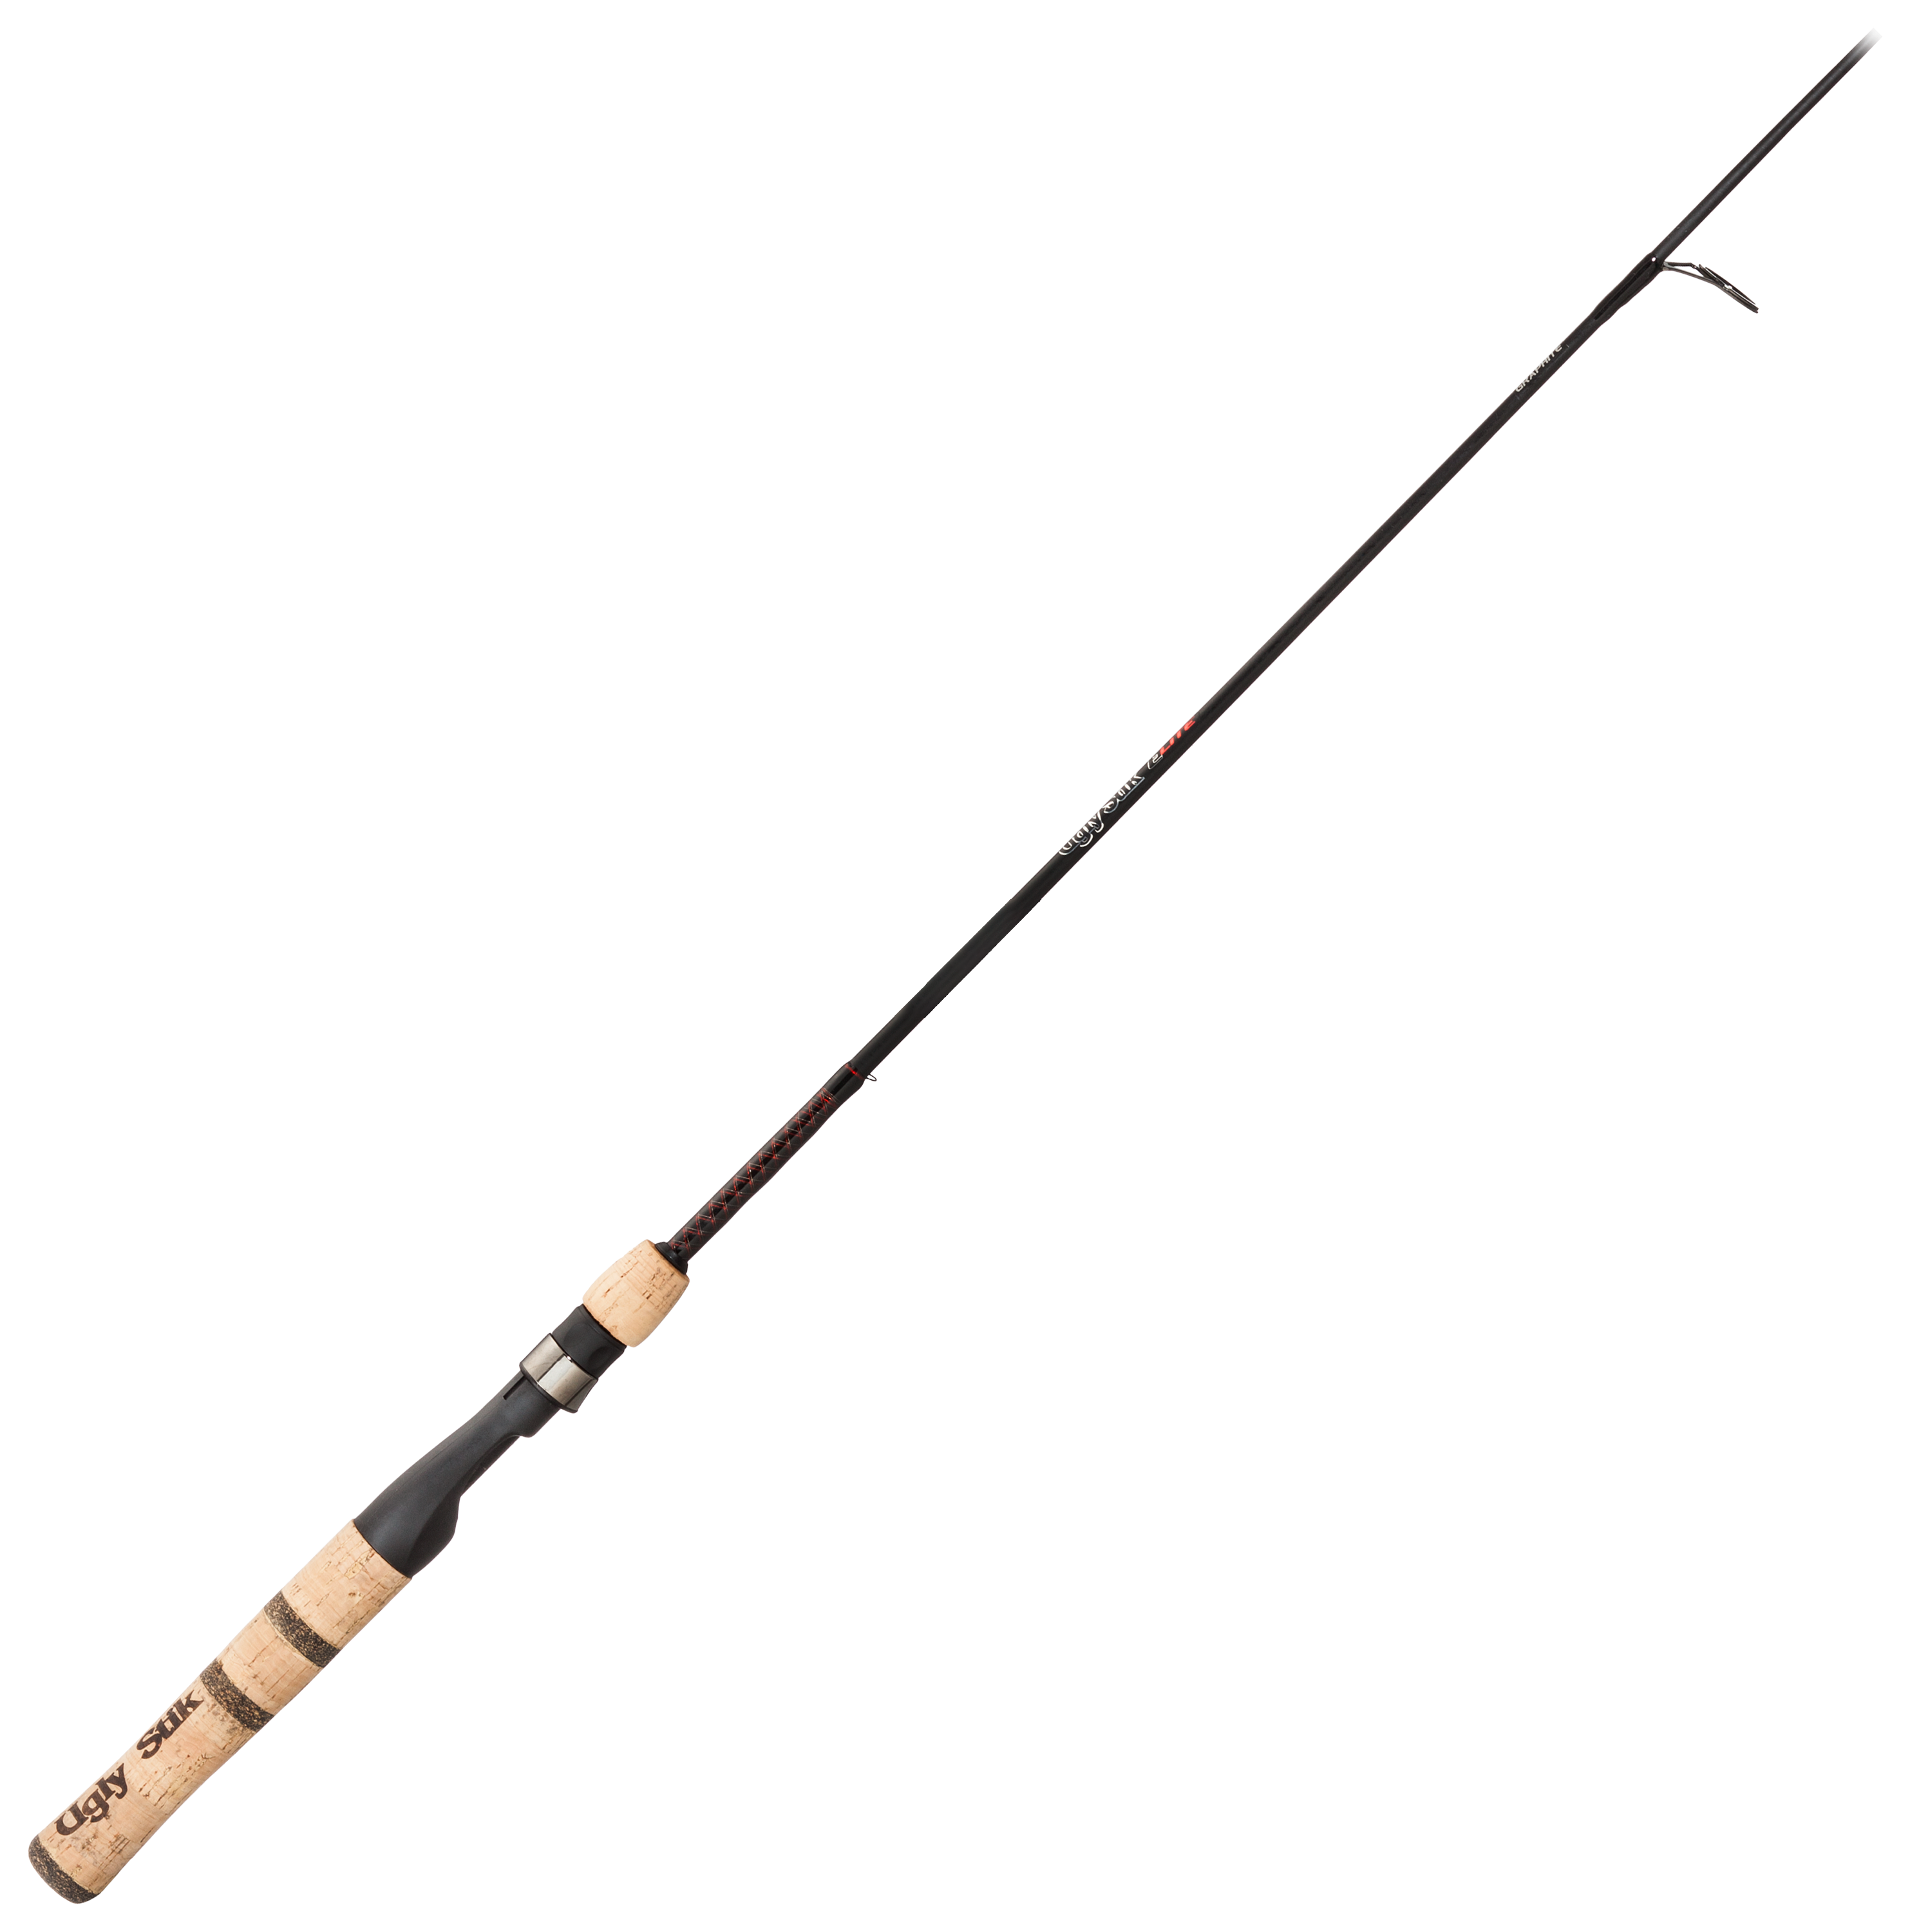 Picked up a Ugly Stick Pro Lite 7' rod to go with my Pflueger